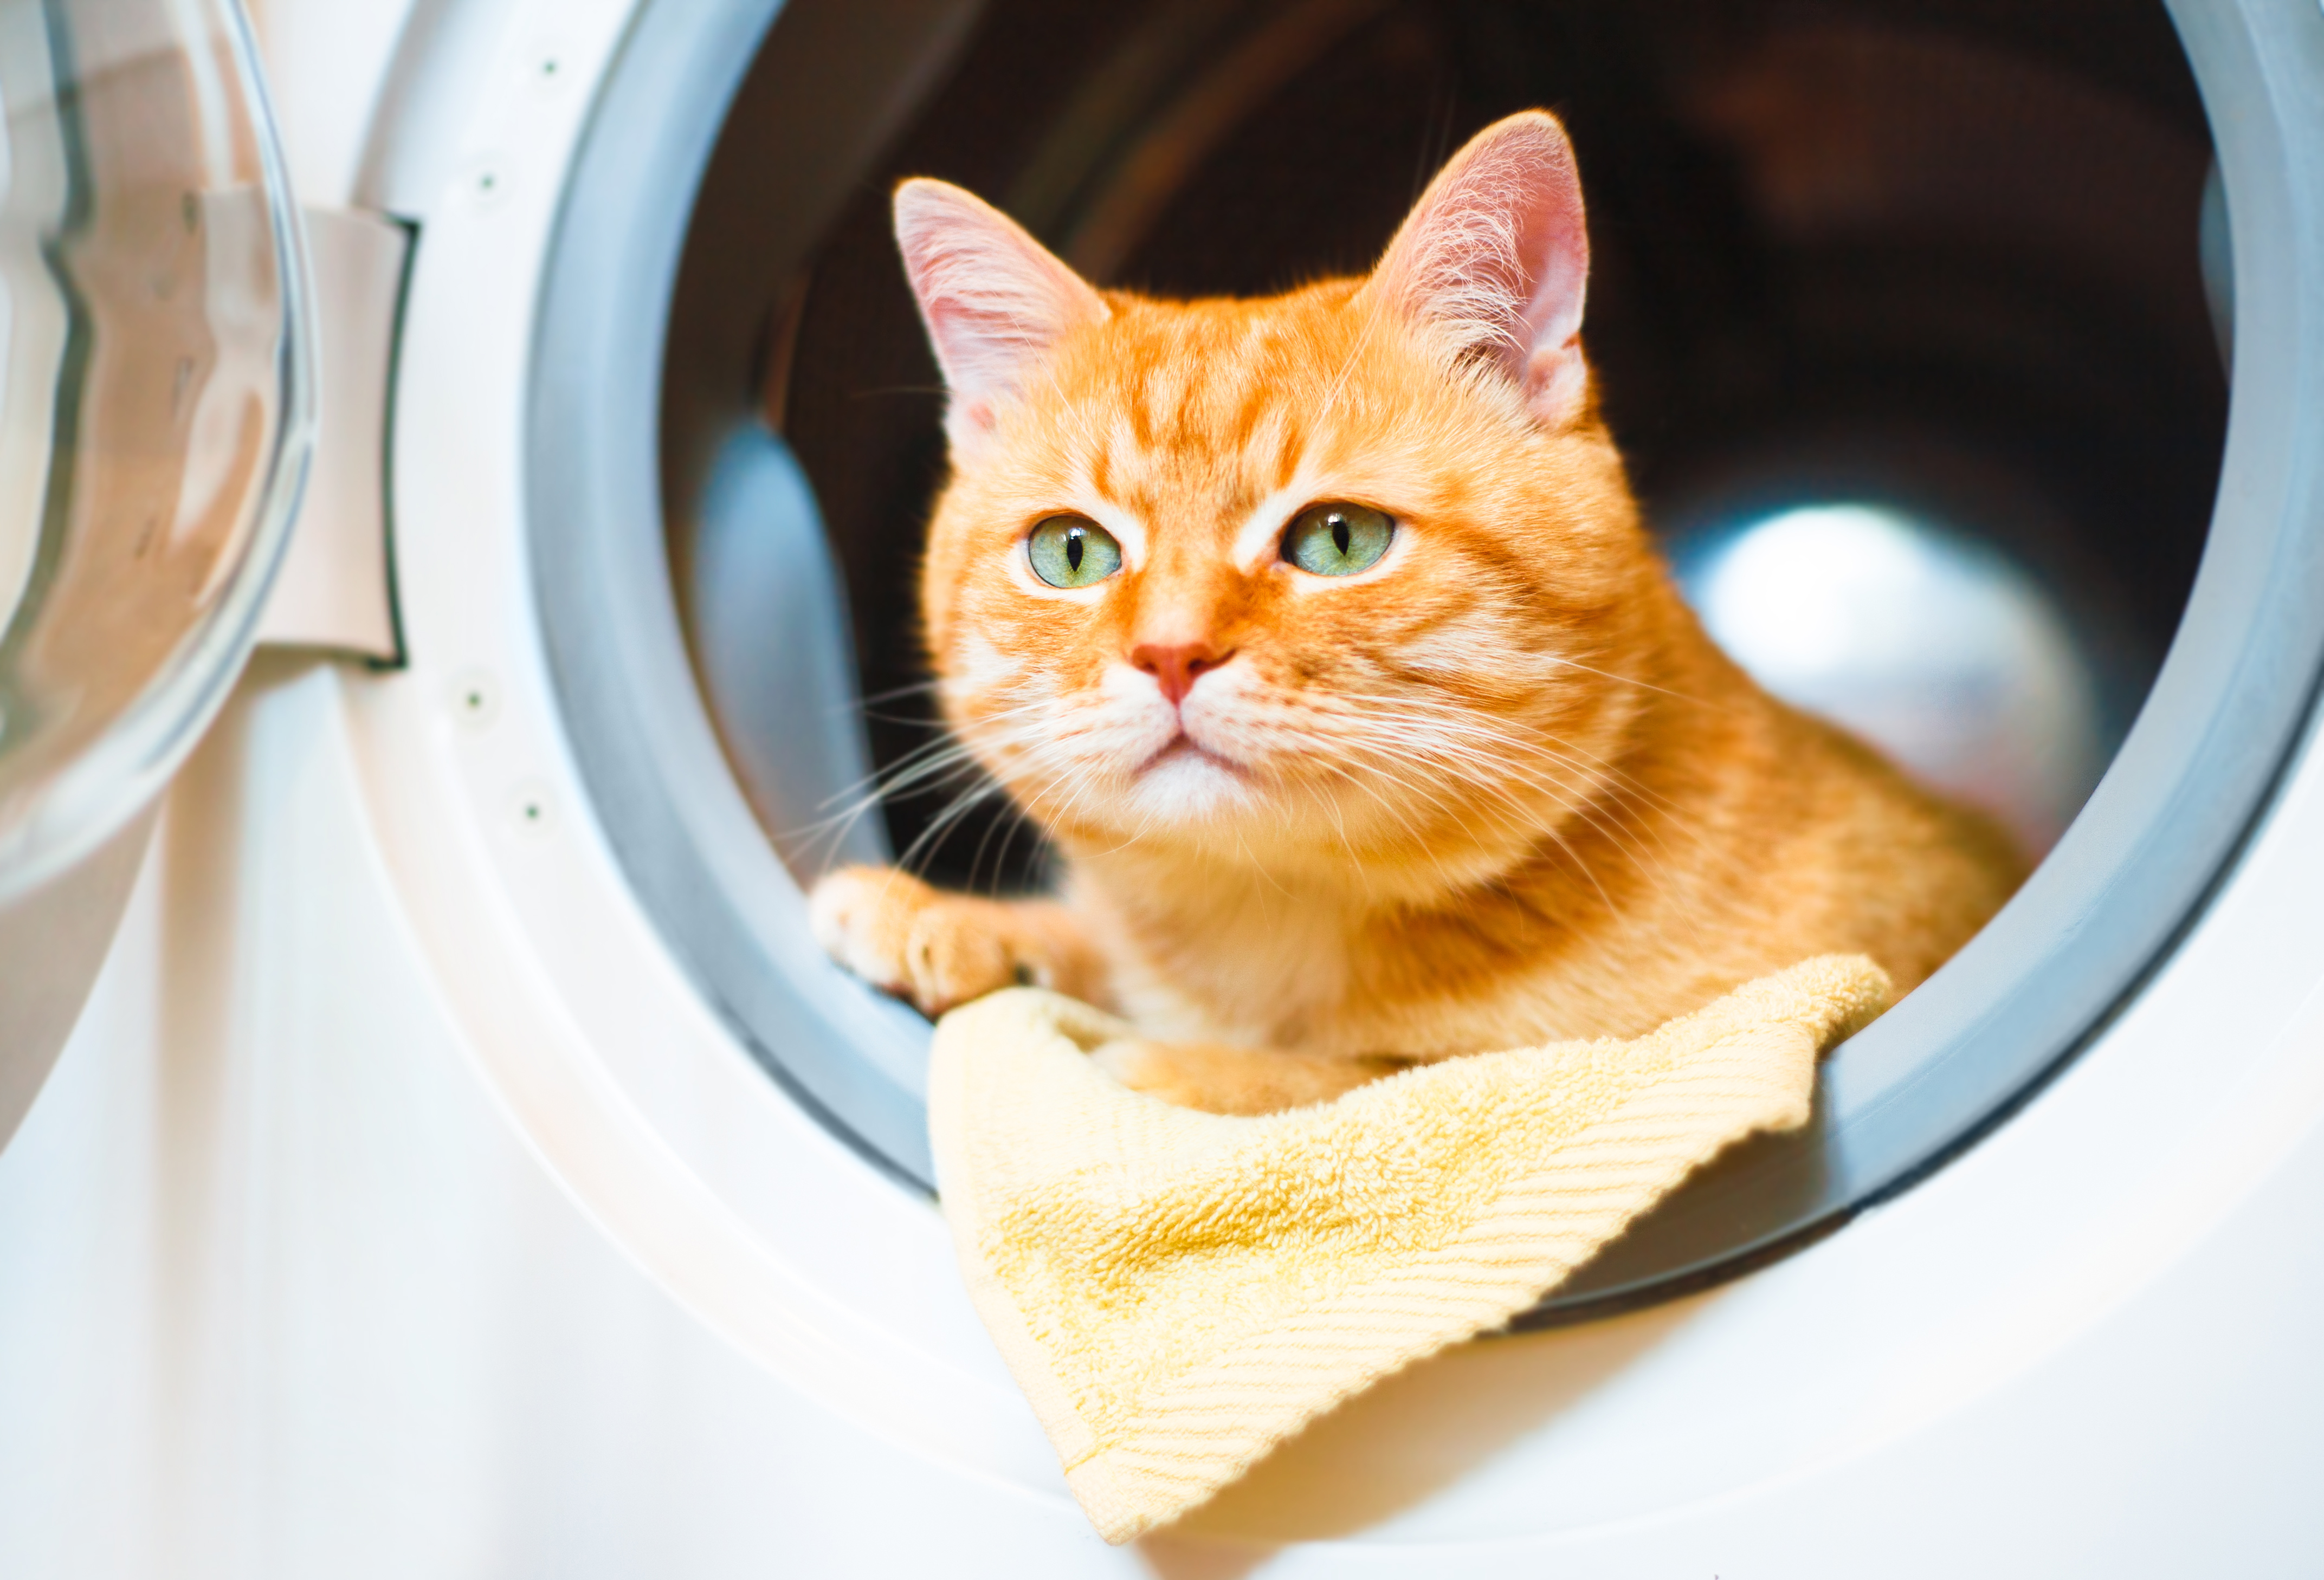 Getting pet hair out of bedding is annoying — but it doesn't have to be. A quick tumble in the laundry machine plus one secret ingredient will prevent pet fur from sticking everywhere.